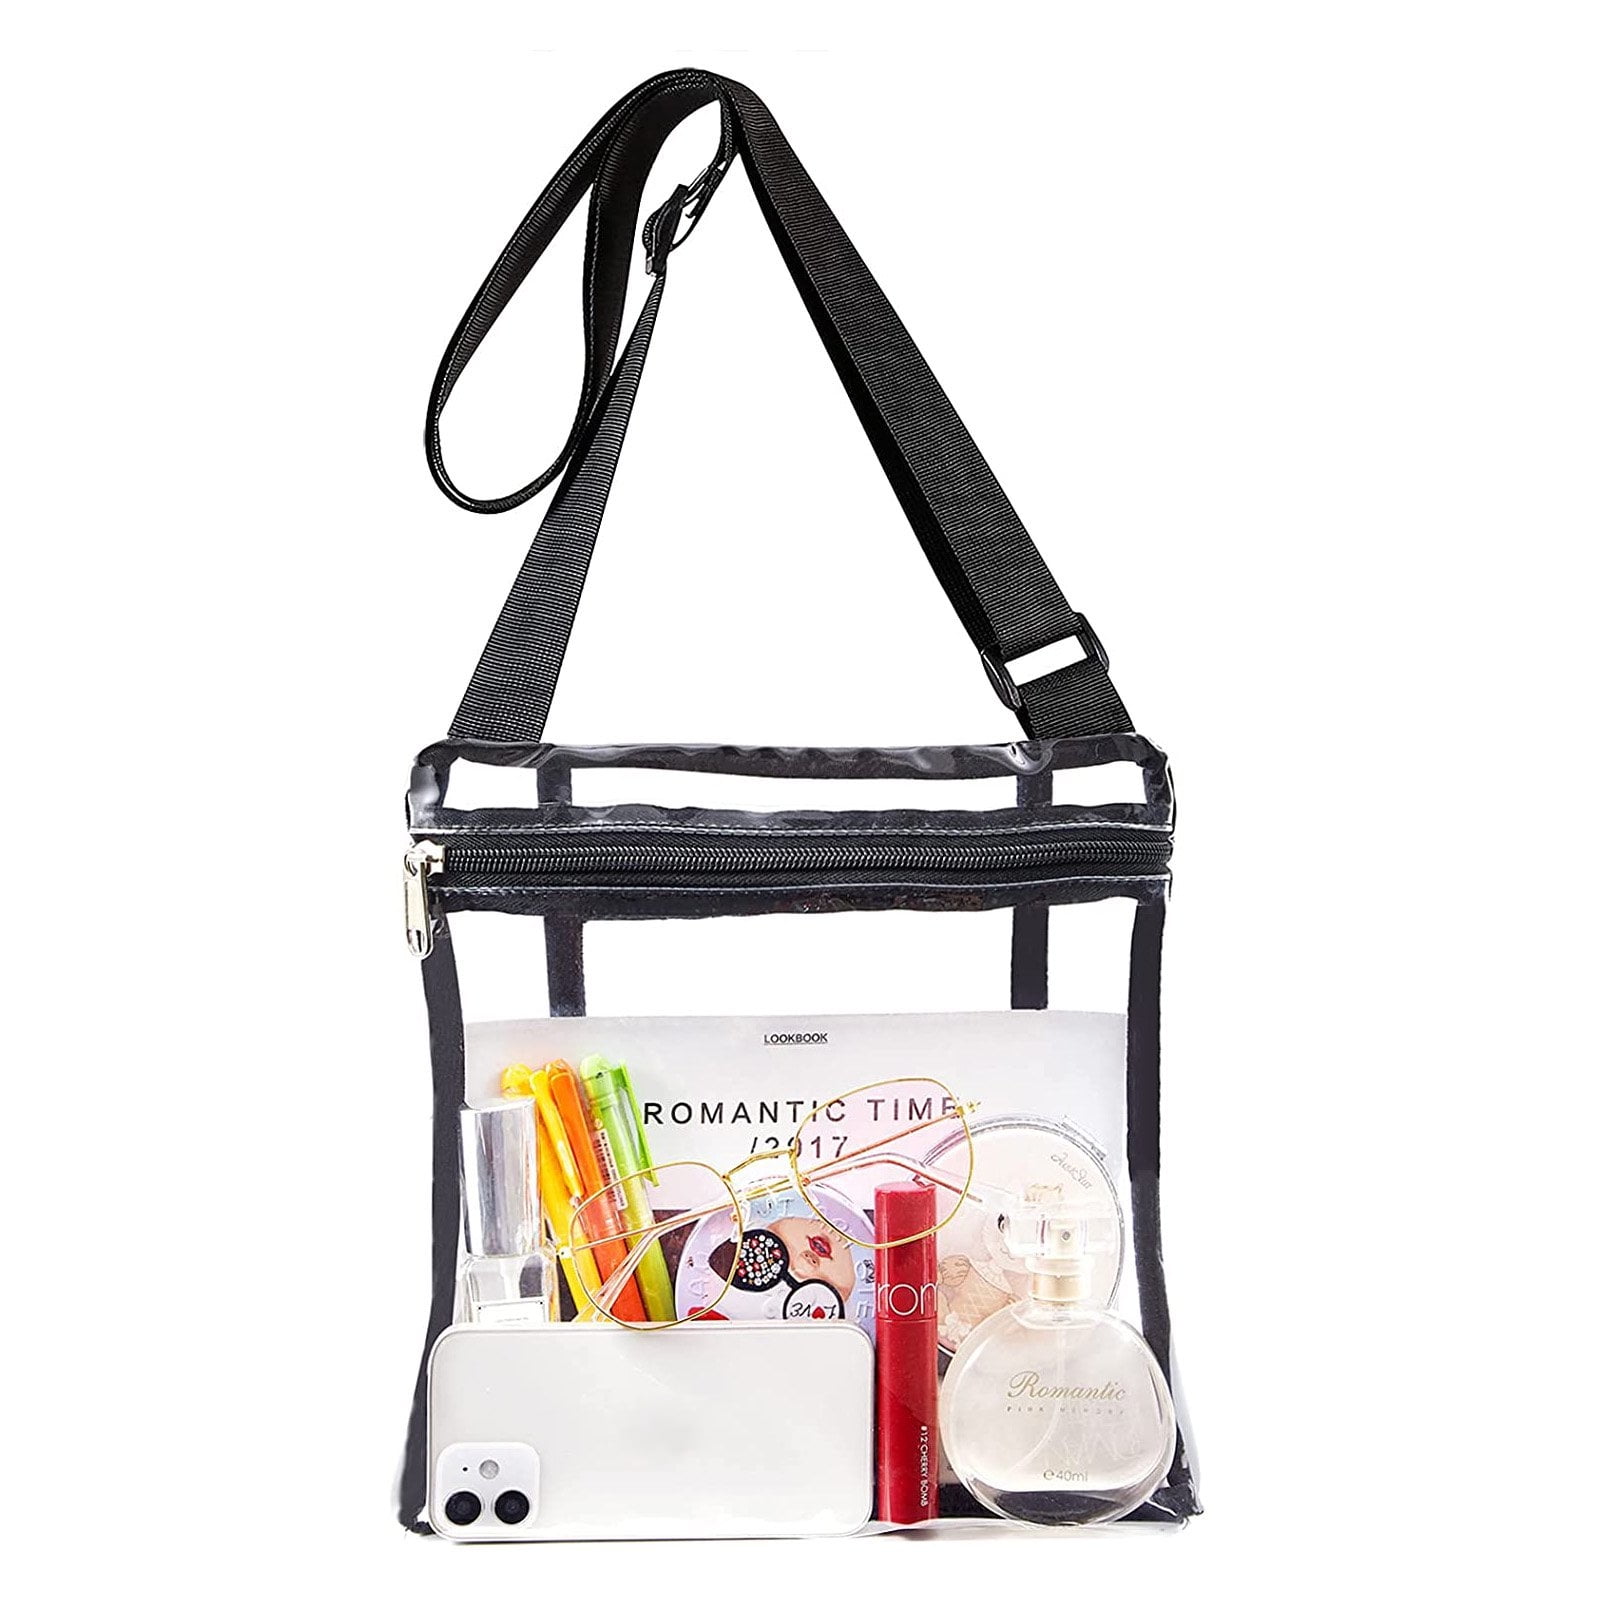 2 Pieces Clear Bag Stadium Approved Clear Concert Purse with Inner Pocket and Adjustable Shoulder Strap Clear Tote Bags Clear Crossbody Bag Clear Handbags Transparent Concert Purse for Women Black, 